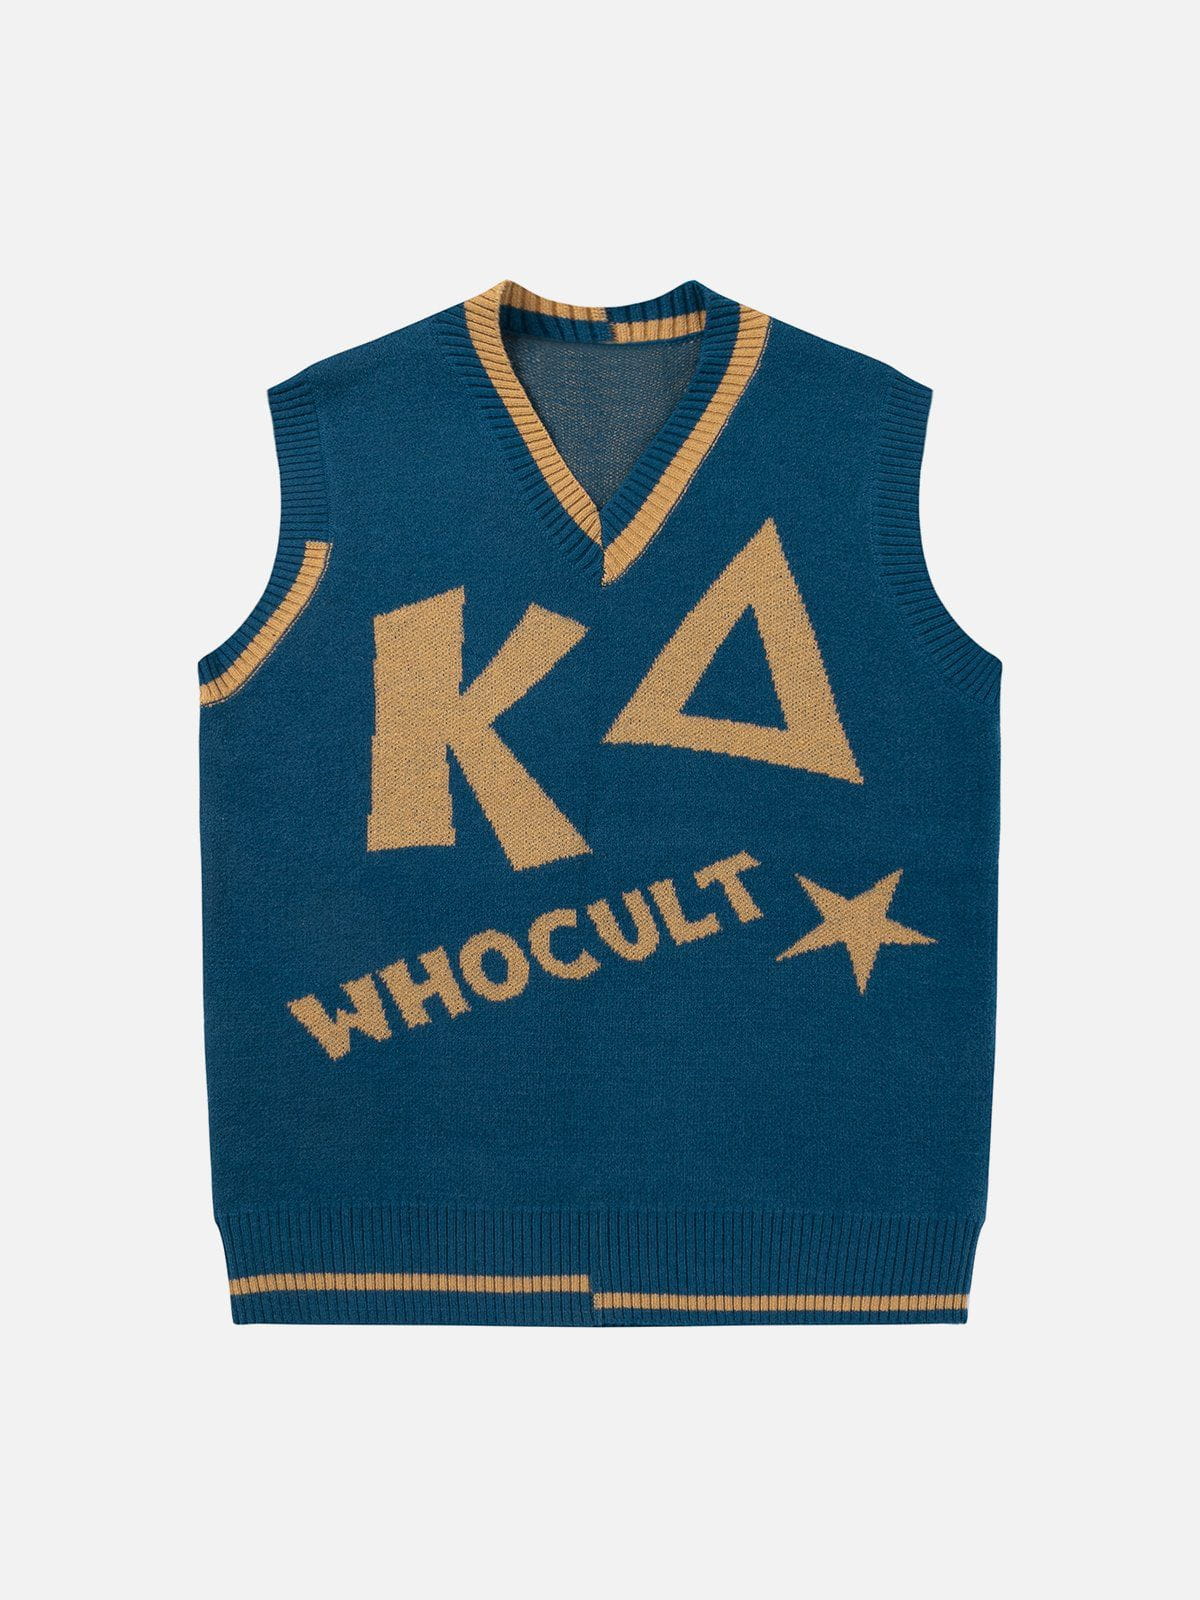 Majesda® - WHOCULT Embroidery Sweater Vest outfit ideas streetwear fashion